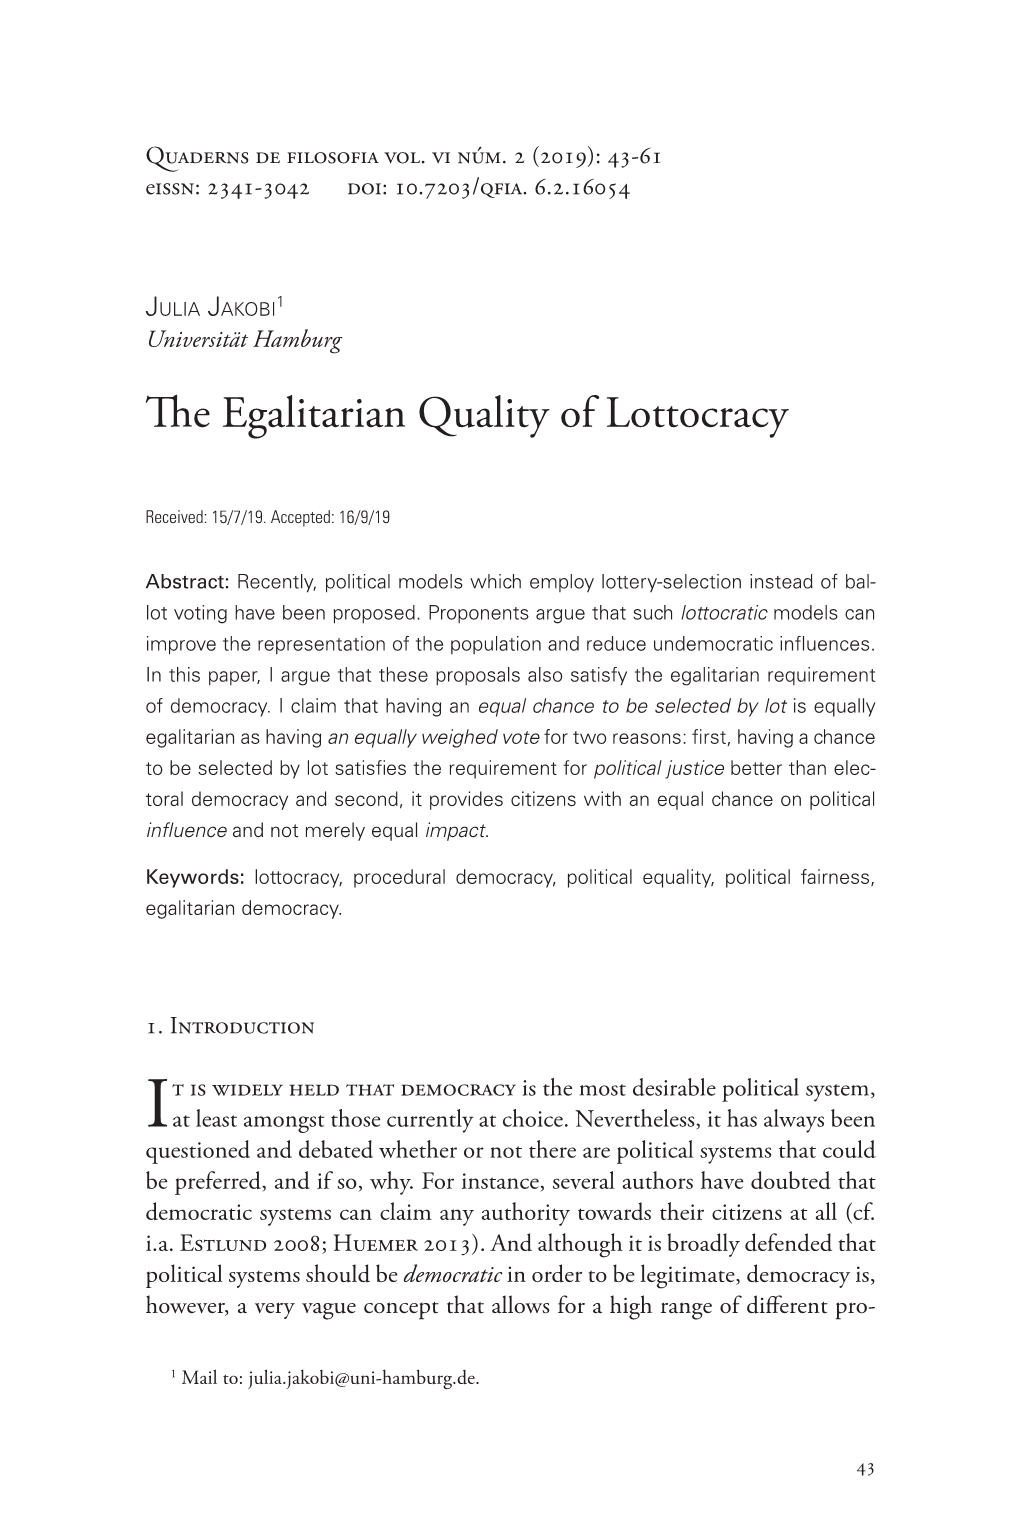 The Egalitarian Quality of Lottocracy